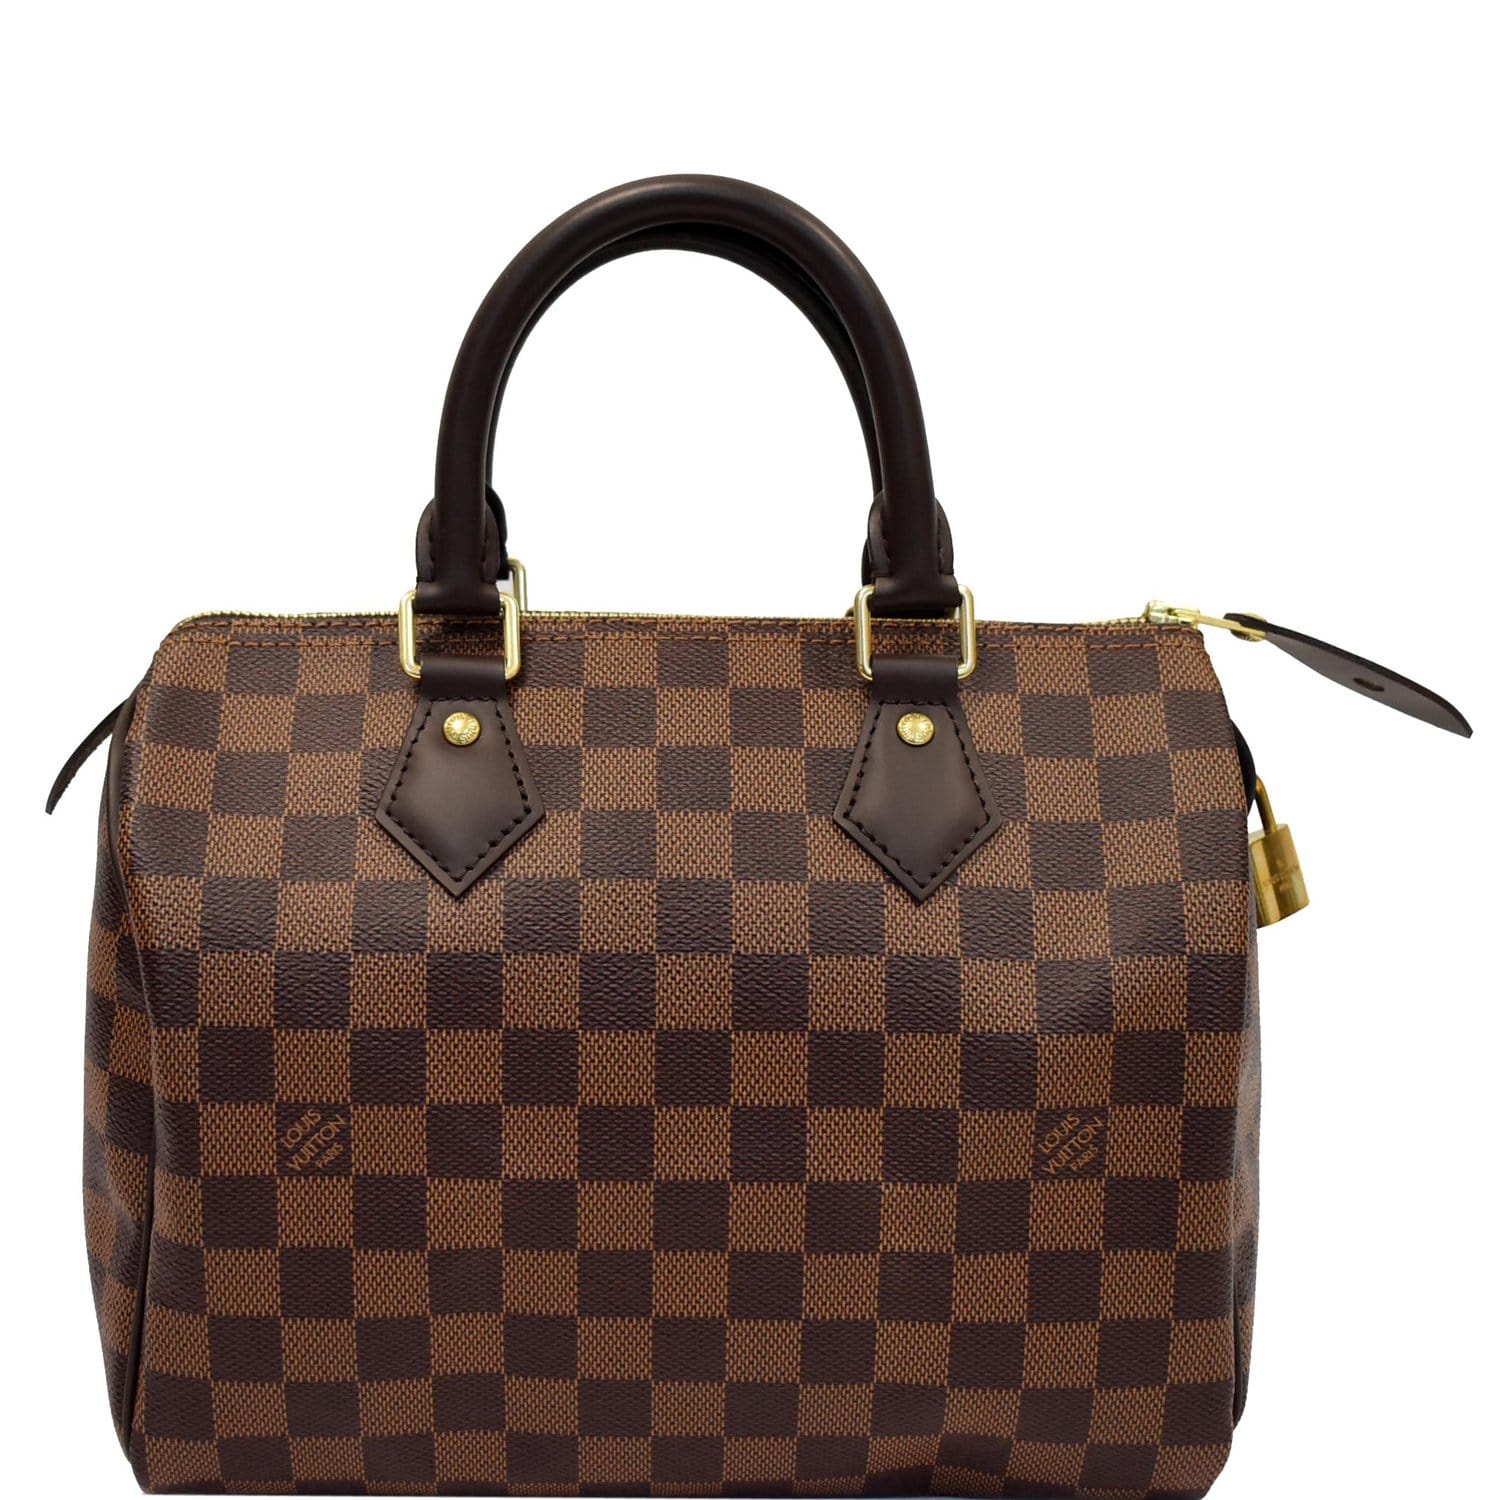 Speedy 25 without strap comes with LV shopping bag,LV dust bag & LV box